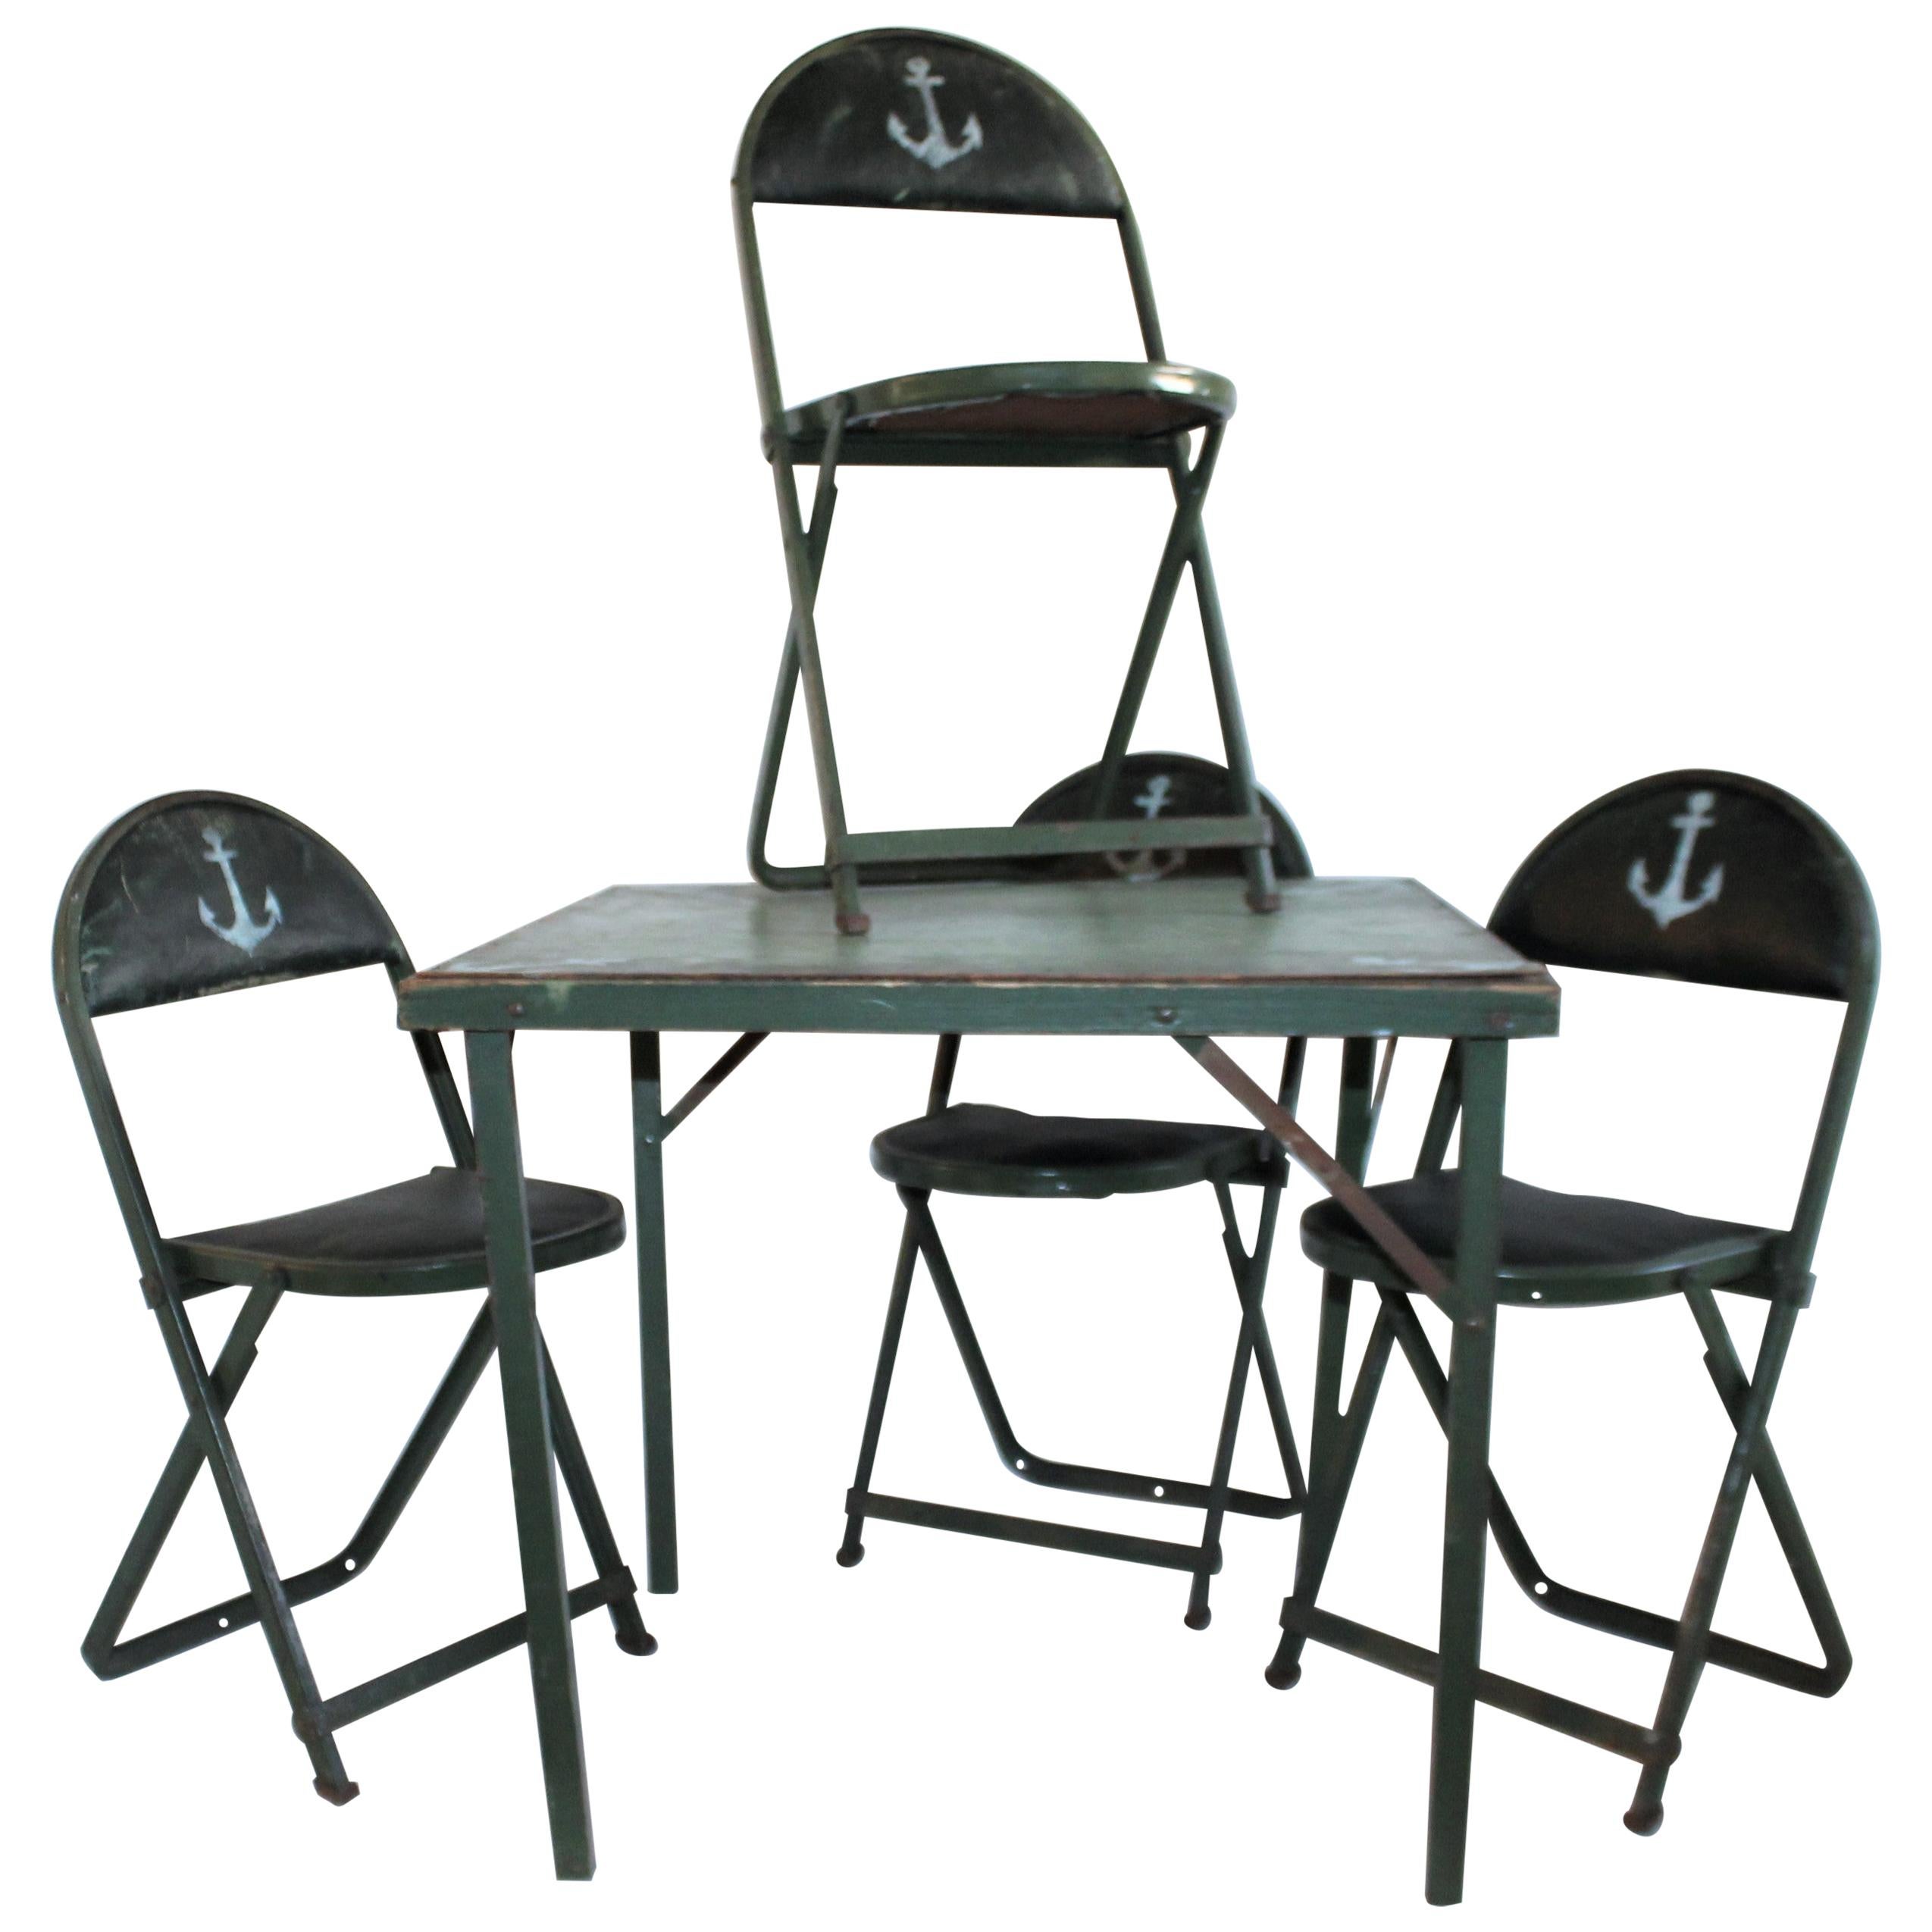 Children's Painted Folding Table and Chairs, 5 Pieces, Set